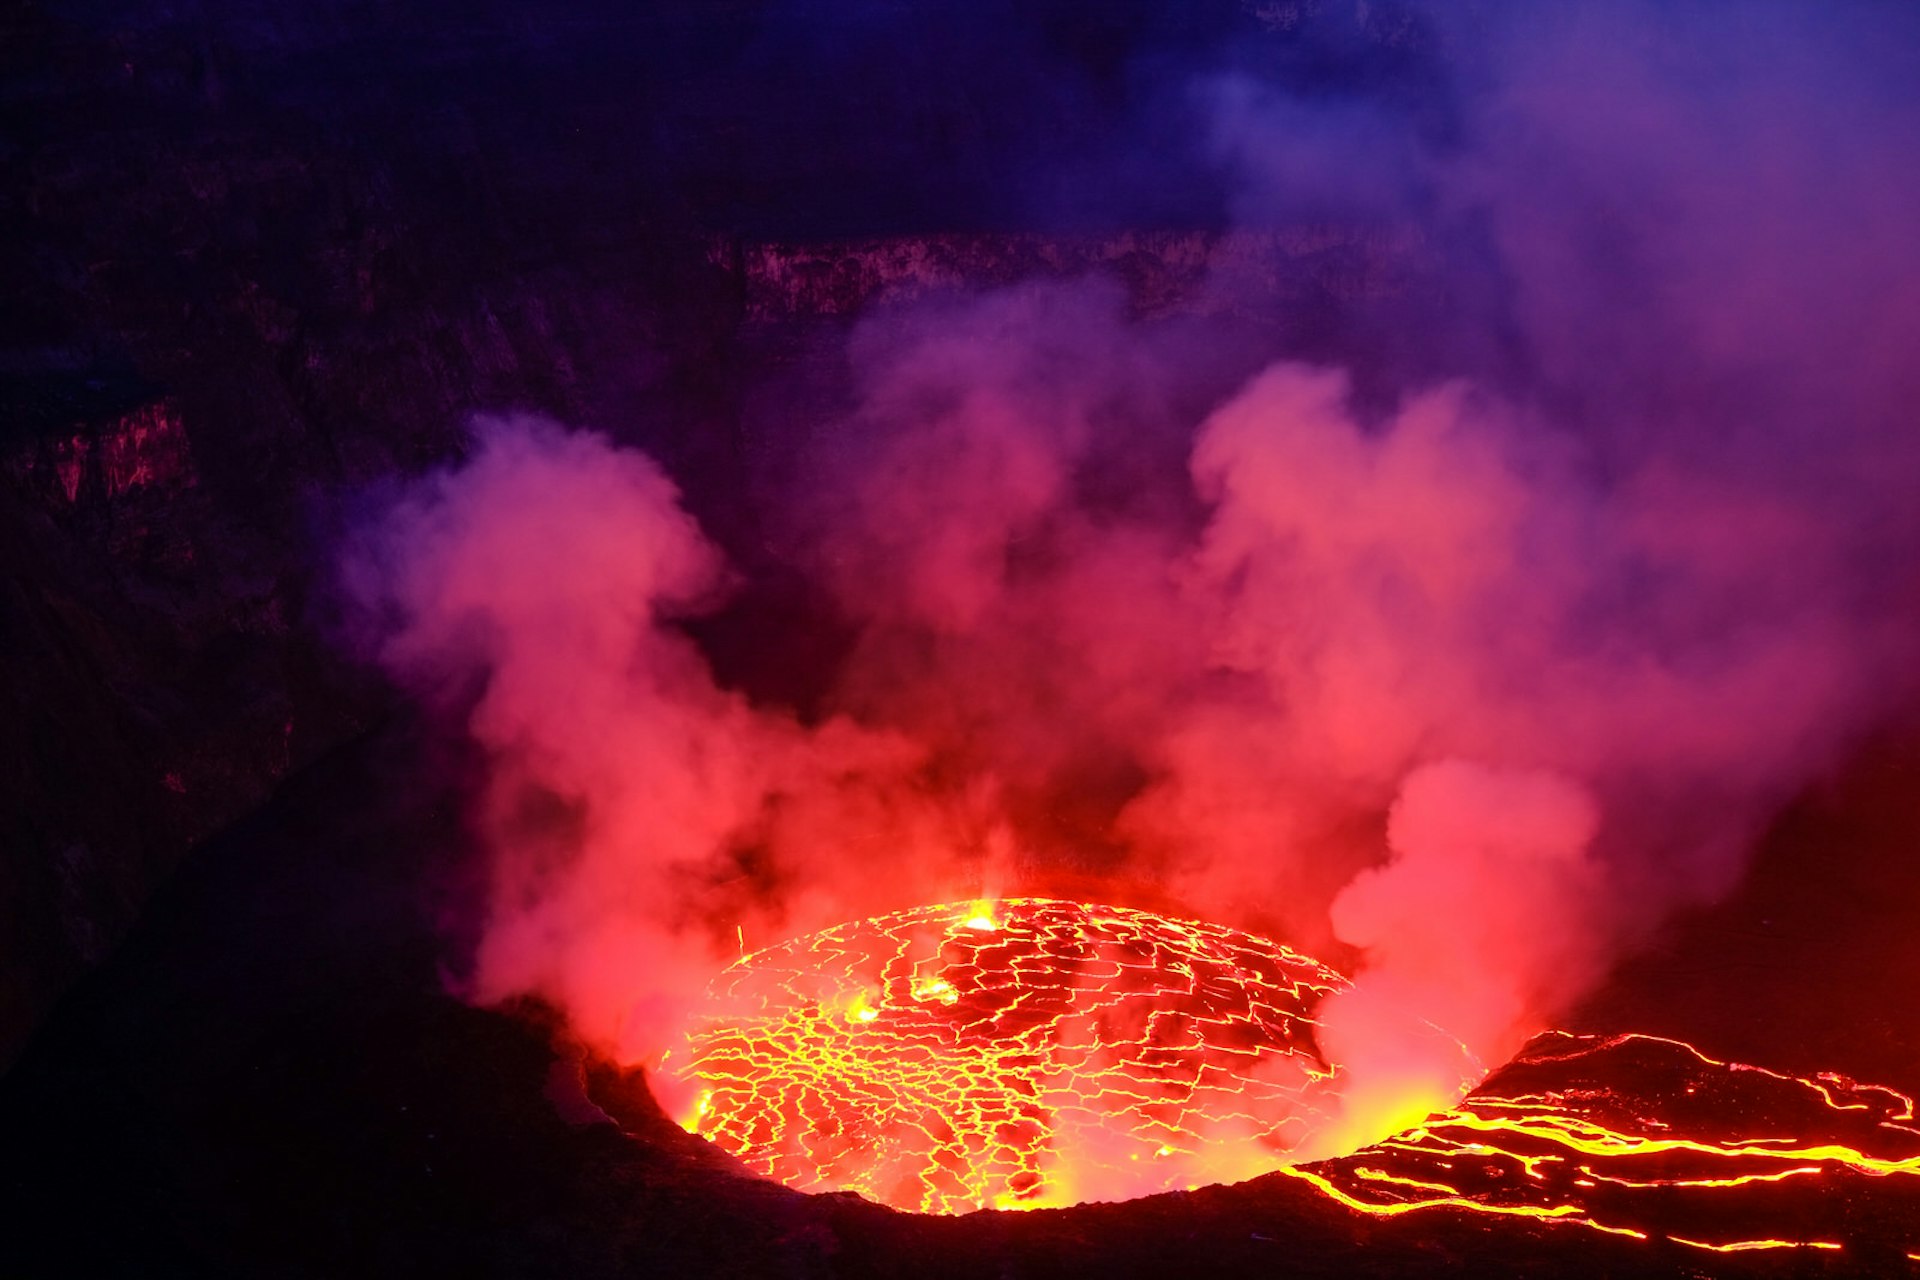 Nyiragongo's lava lake smokes and glows red in the evening darkness.